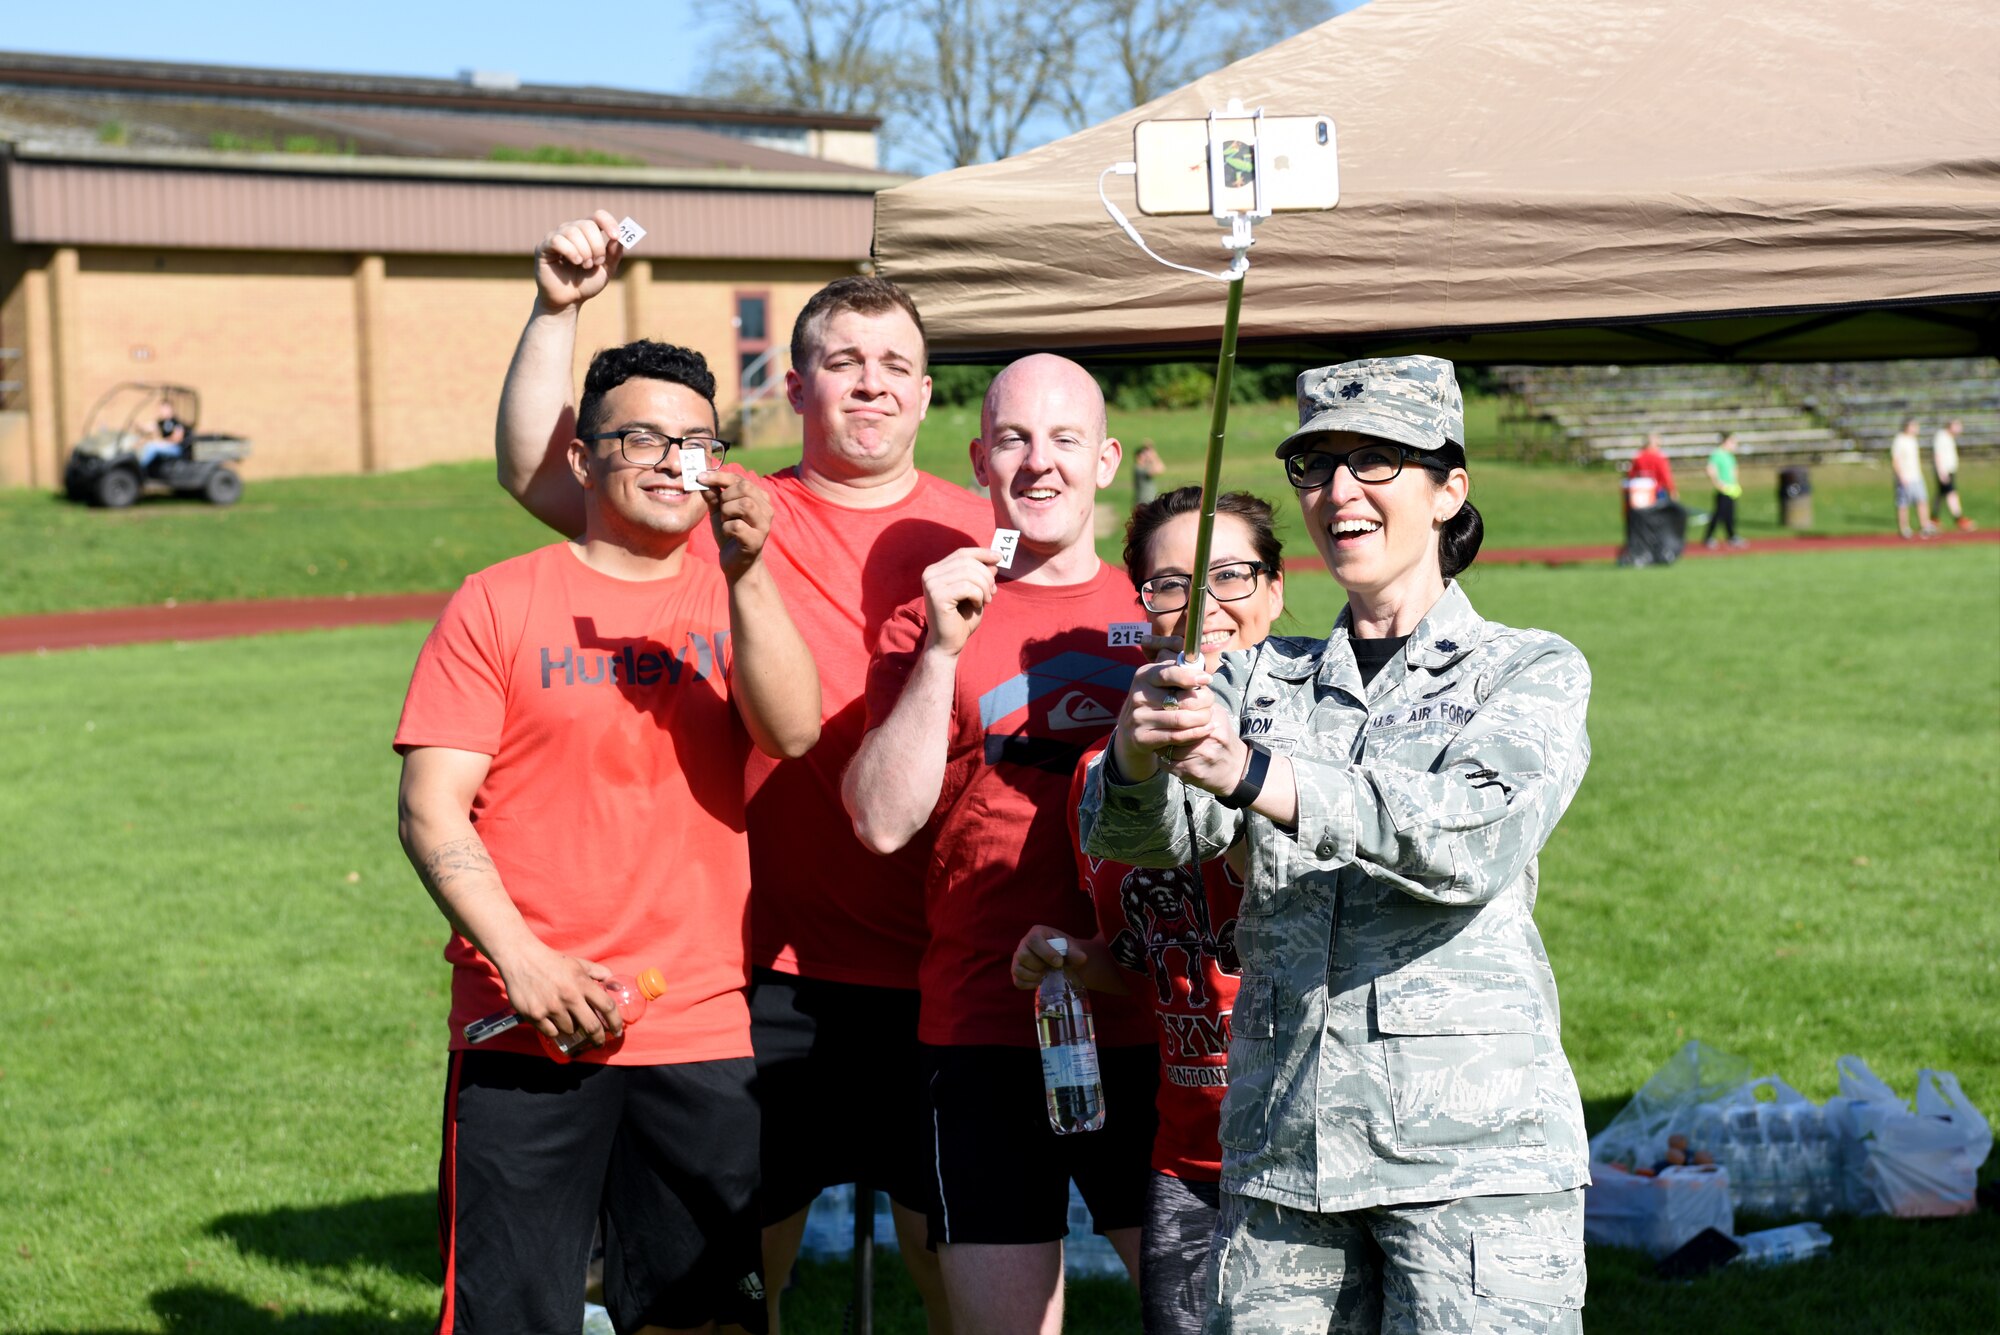 Lt. Col. Kelli R. Moon, commander of the 48th Force Support Squadron, poses for a selfie with Airmen participating in a relay run as part of the 48th Force Support Squadron's "You Got Served" events at Royal Air Force Lakenheath, England, May 4, 2018. During the relay run participating squadrons recieved raffle tickets for cash prizes between $10 and $1,000.